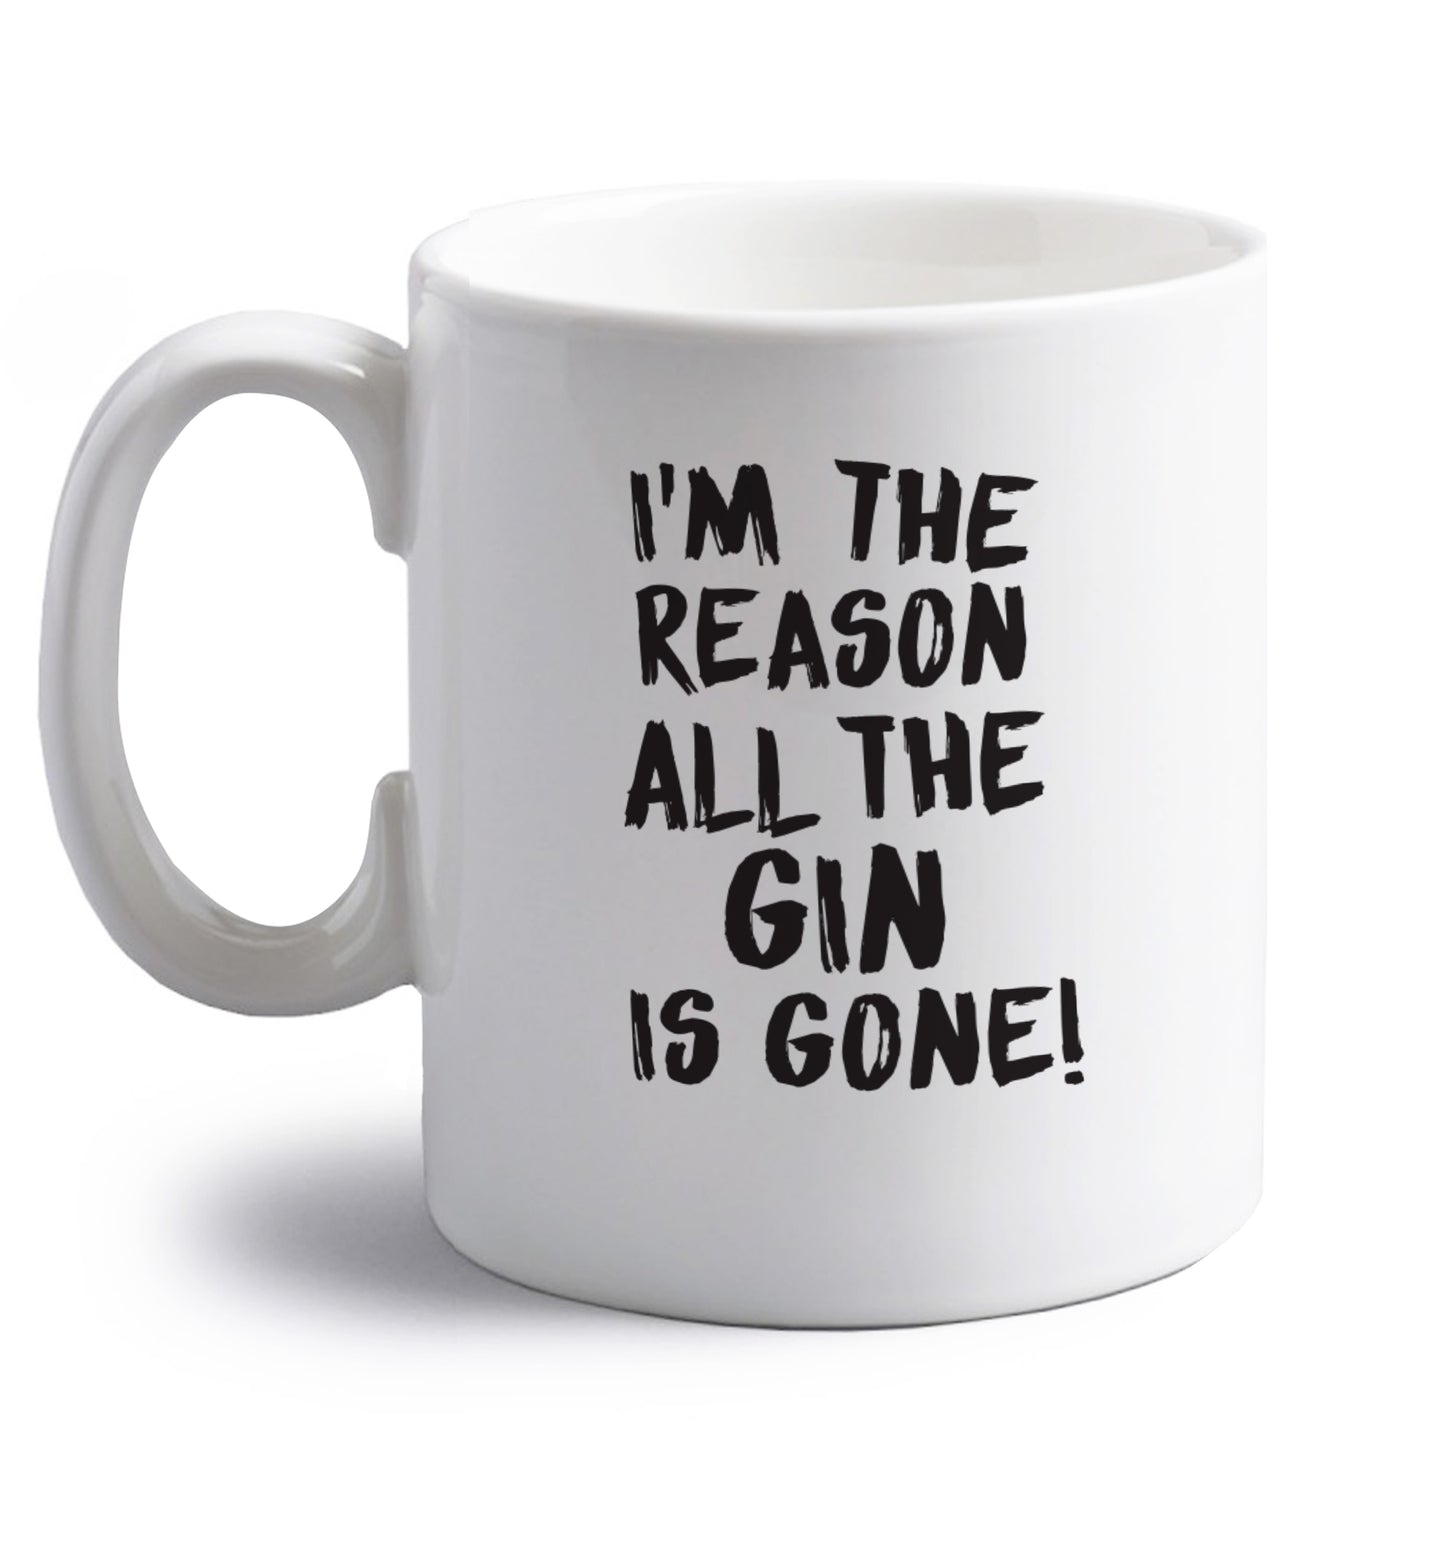 I'm the reason all the gin is gone right handed white ceramic mug 